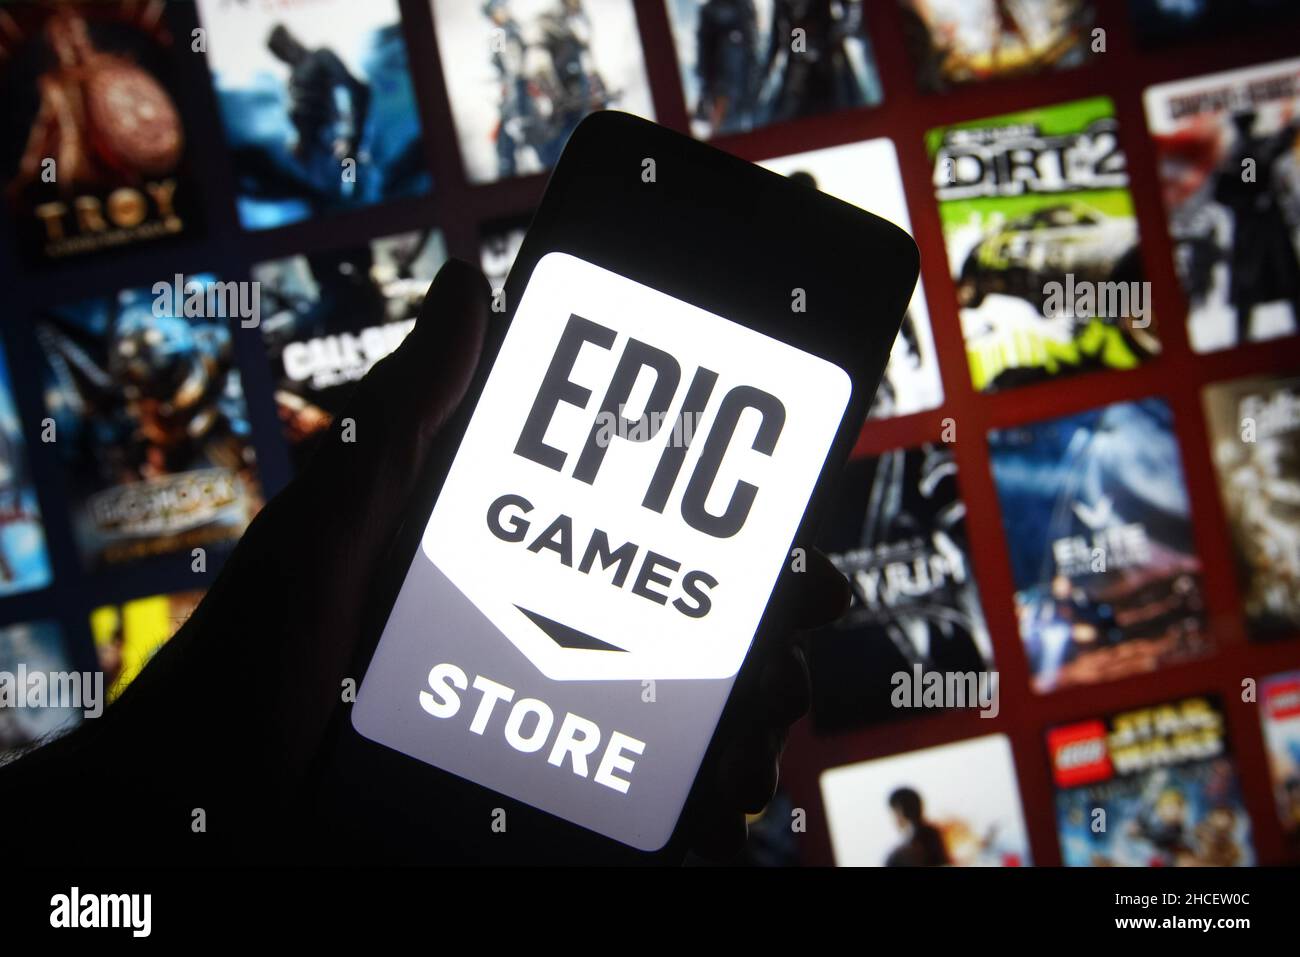 hand holding smartphone with epic games store logo on the screen